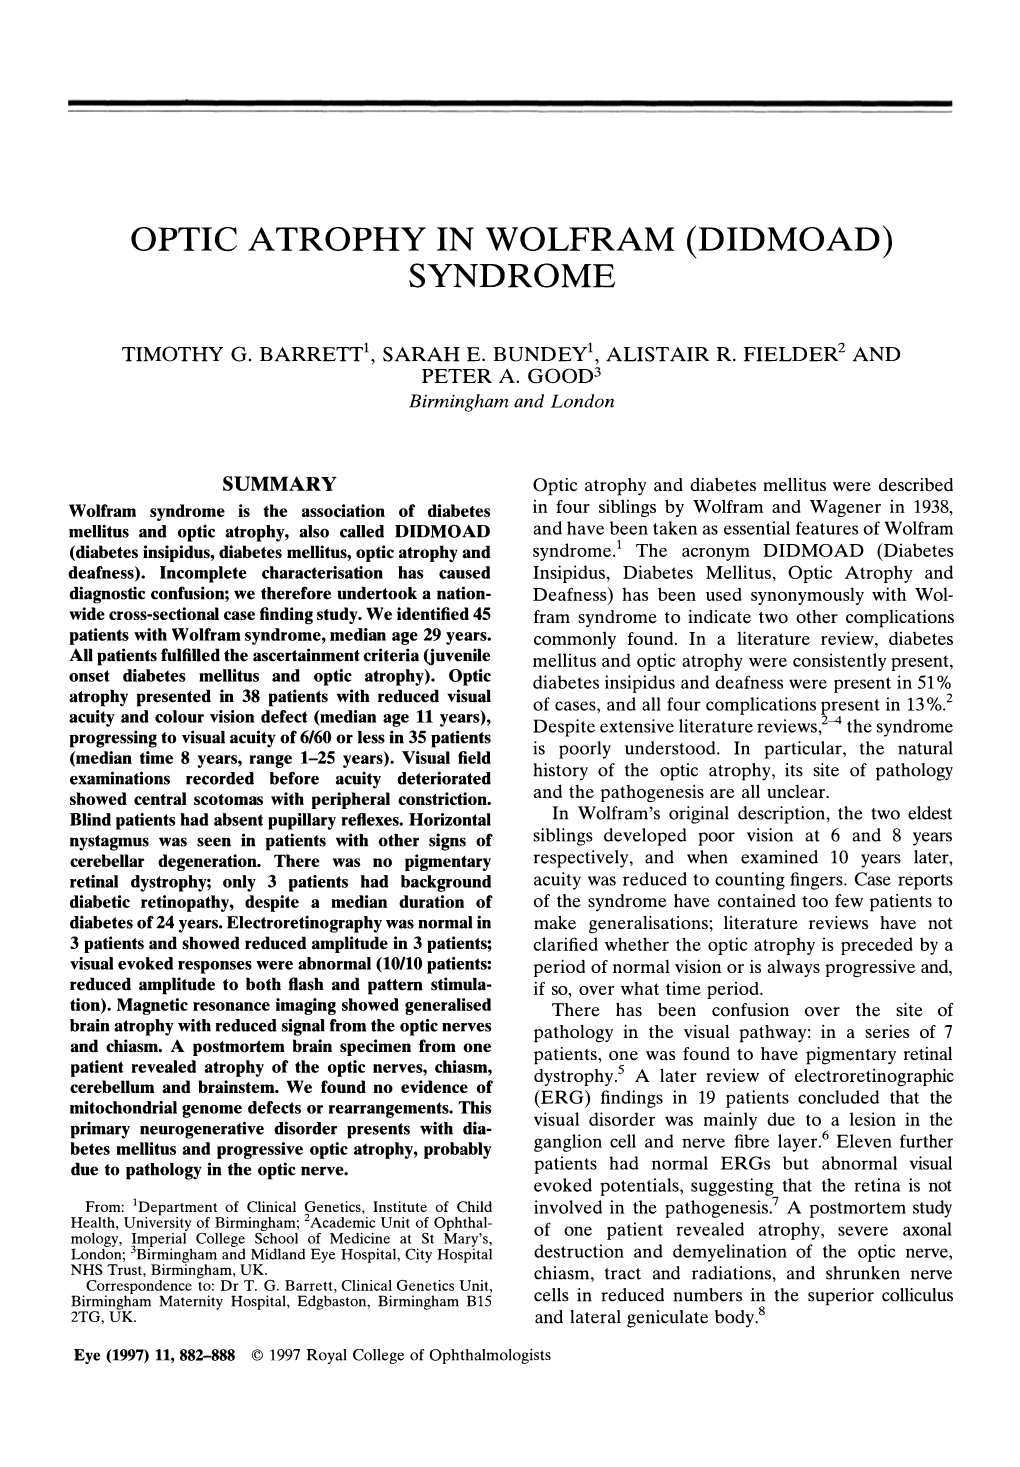 Optic Atrophy in Wolfram (Didmoad) Syndrome